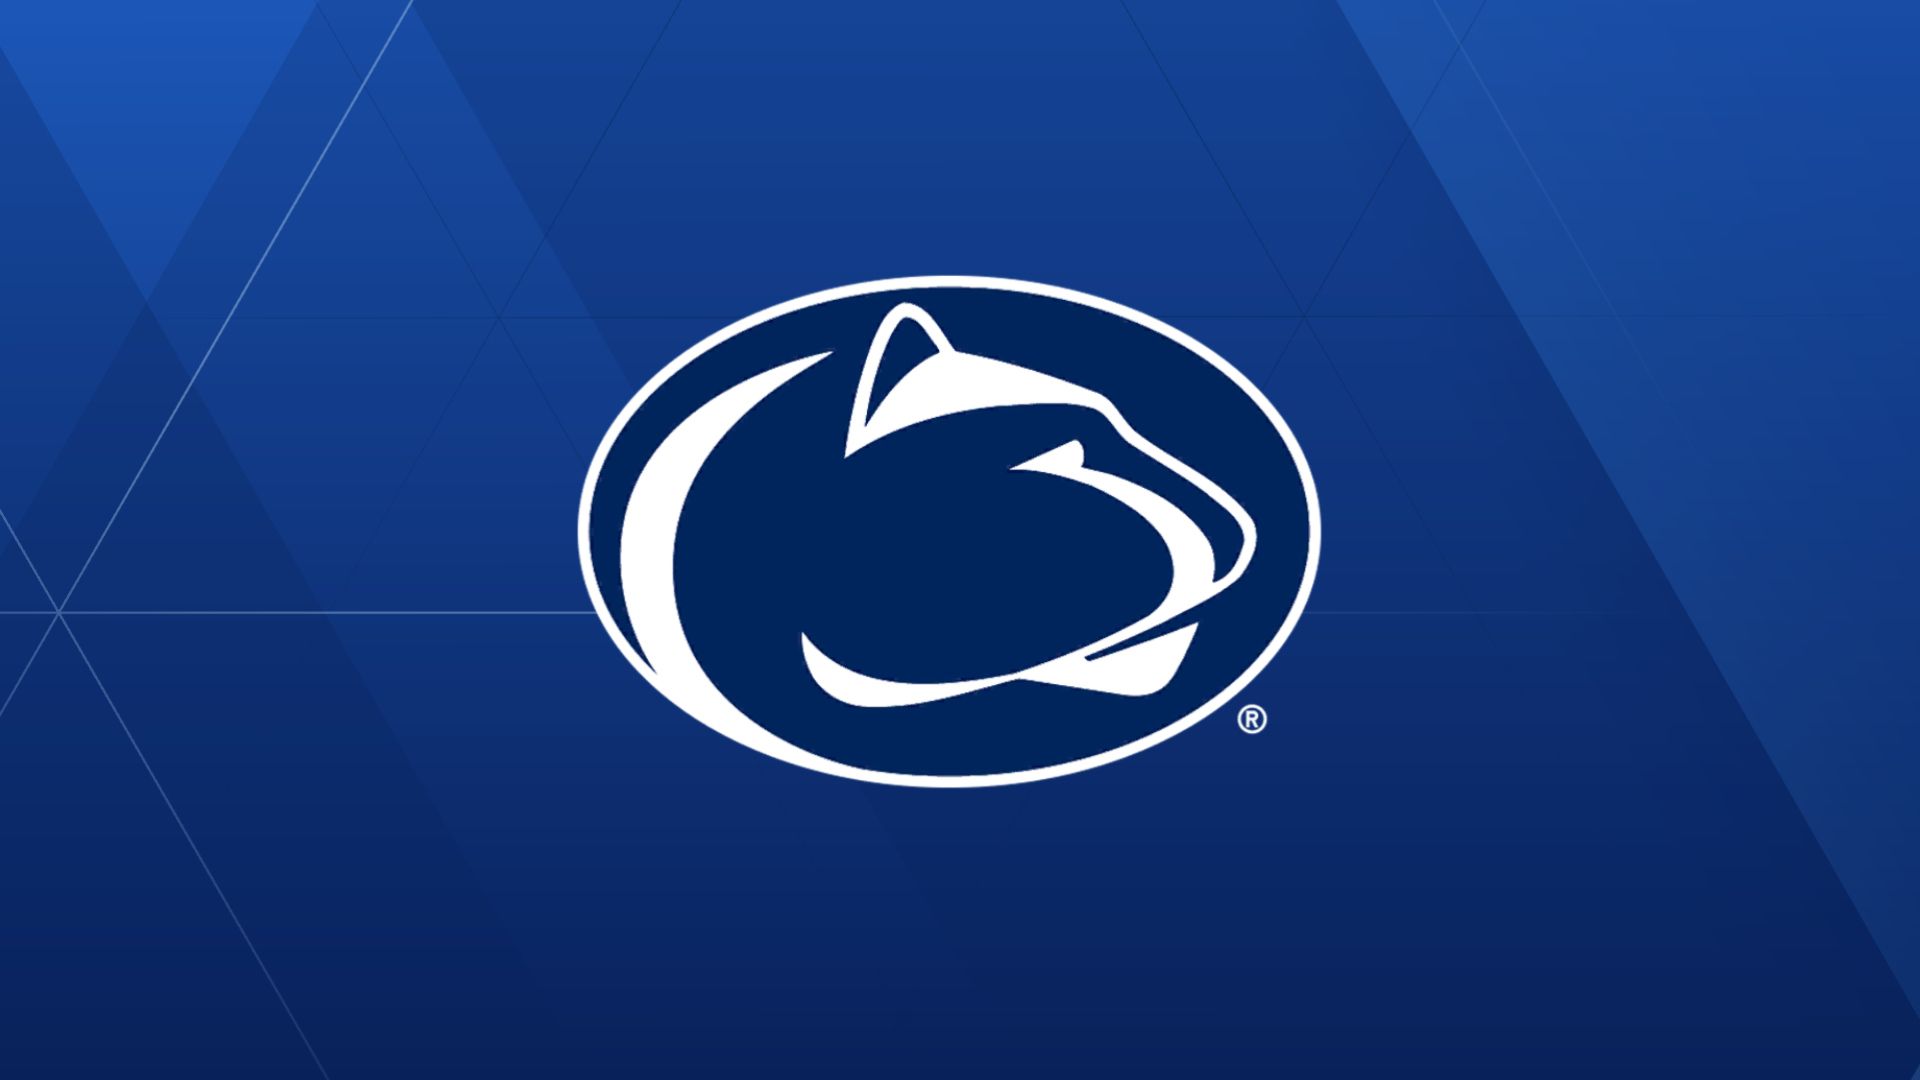 Penn State football's 2020 schedule released